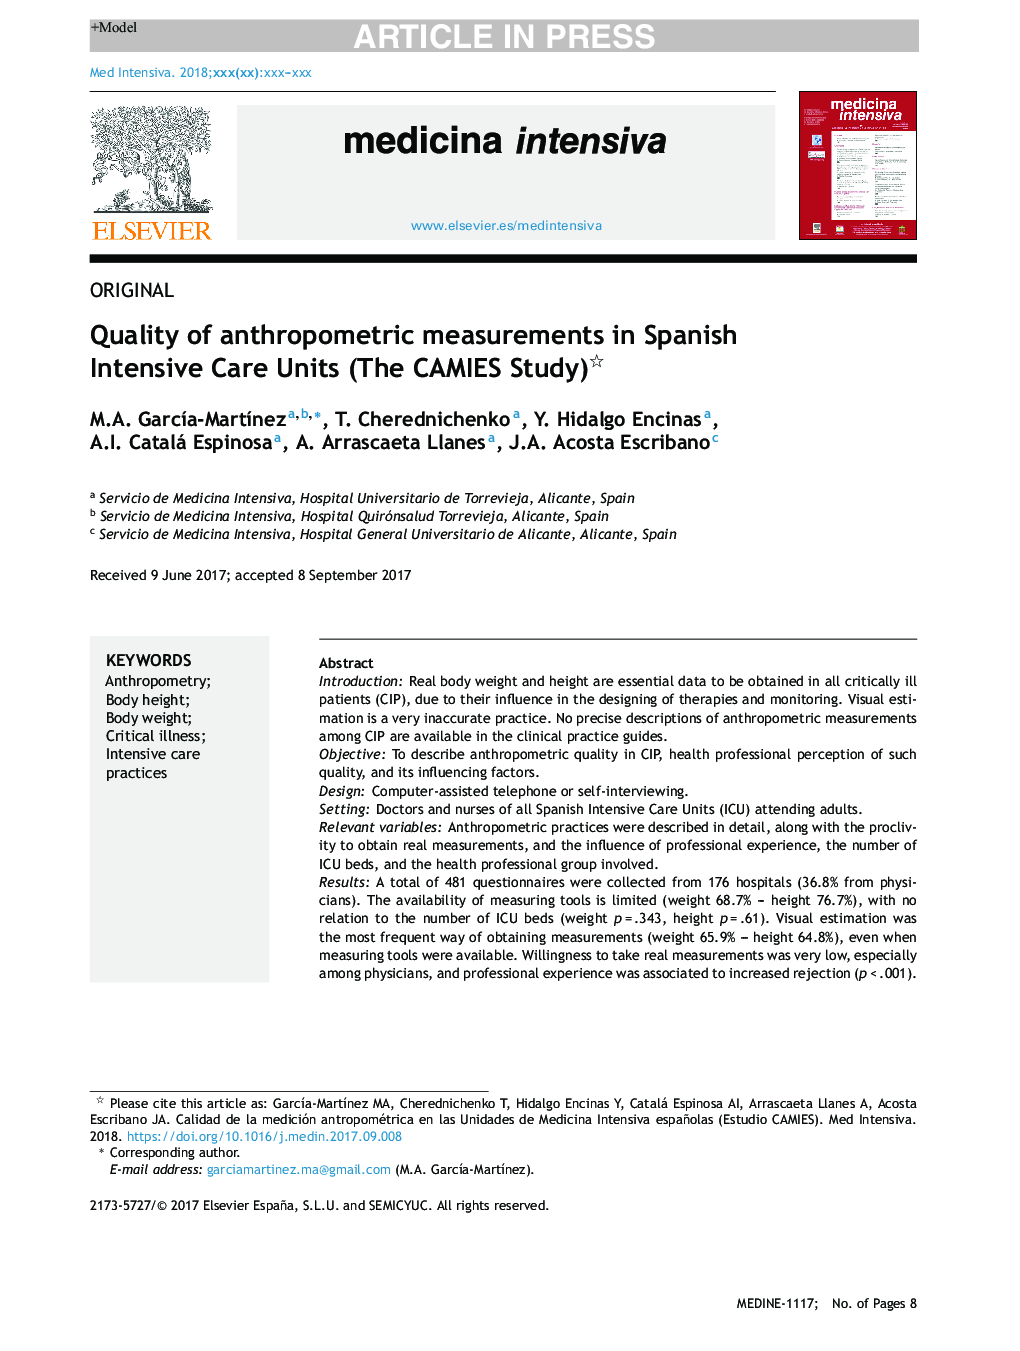 Quality of anthropometric measurements in Spanish Intensive Care Units (The CAMIES Study)